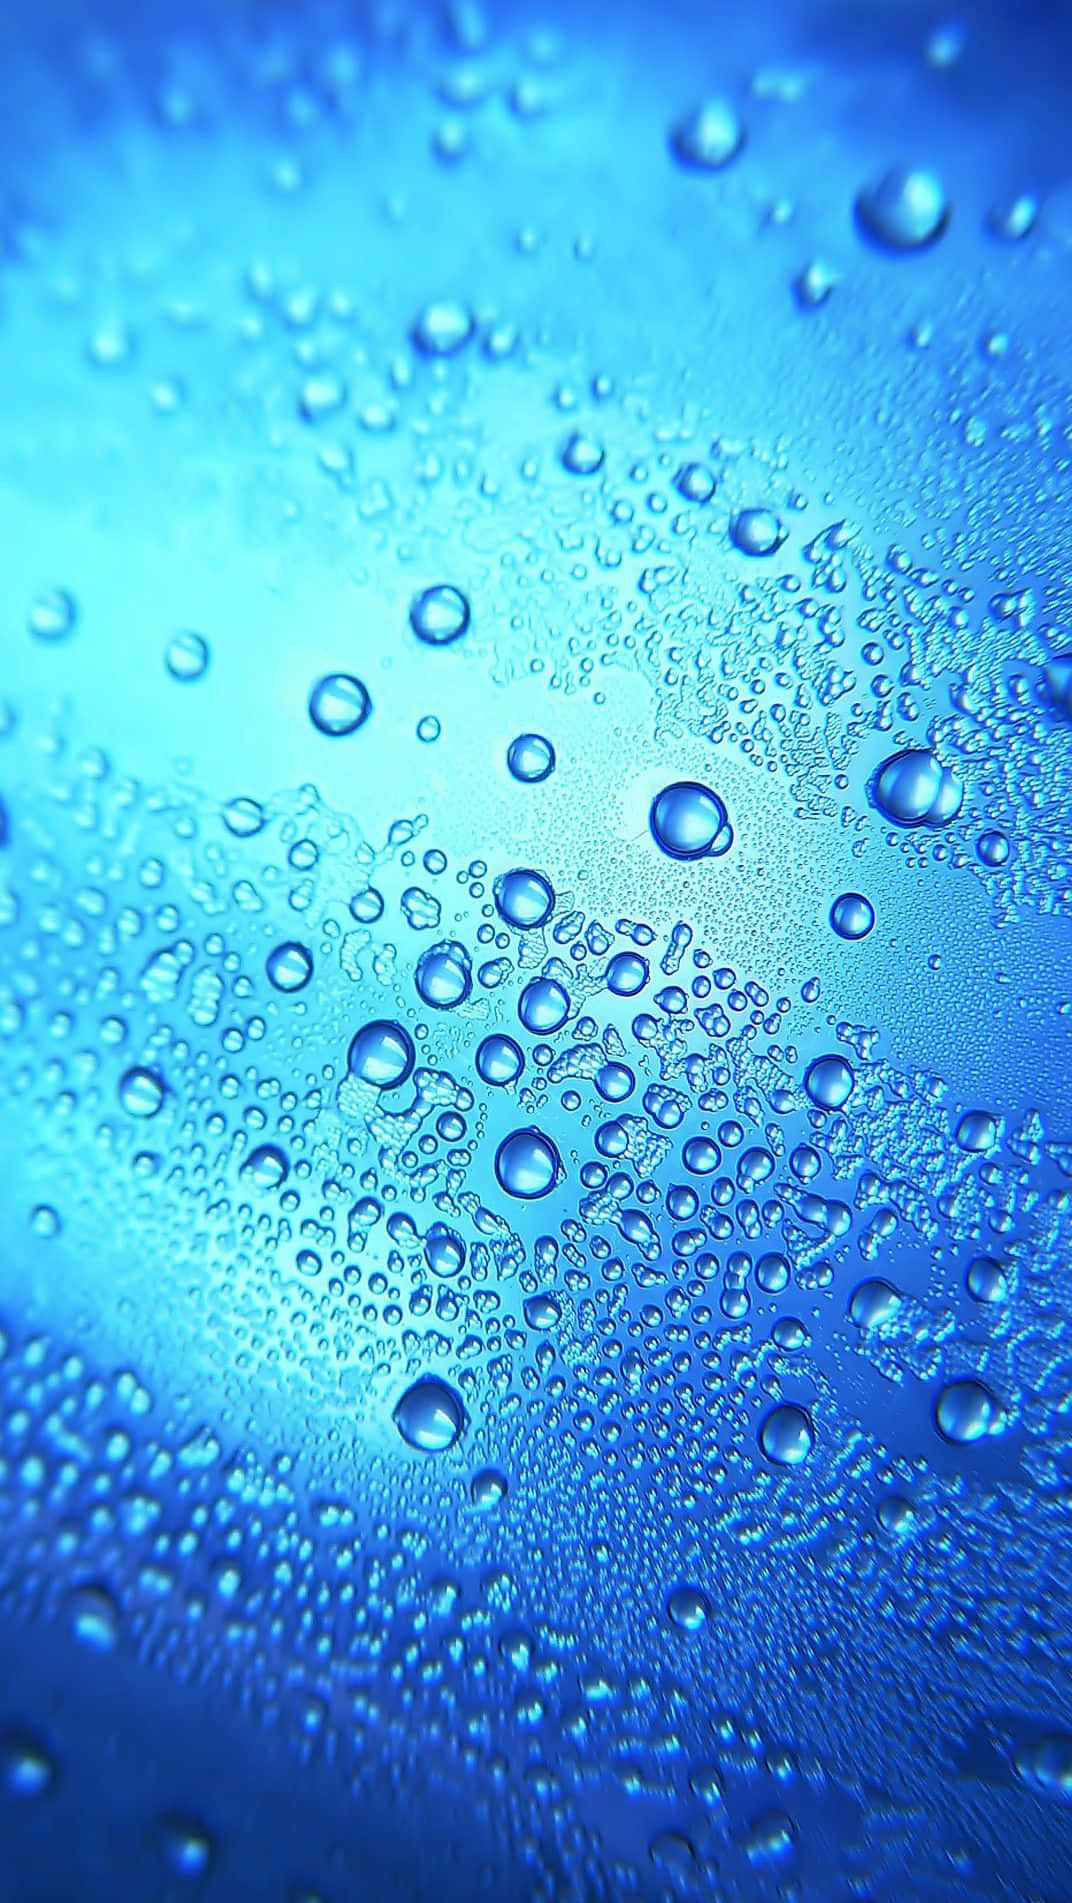 Water Droplets On A Blue Glass Wallpaper